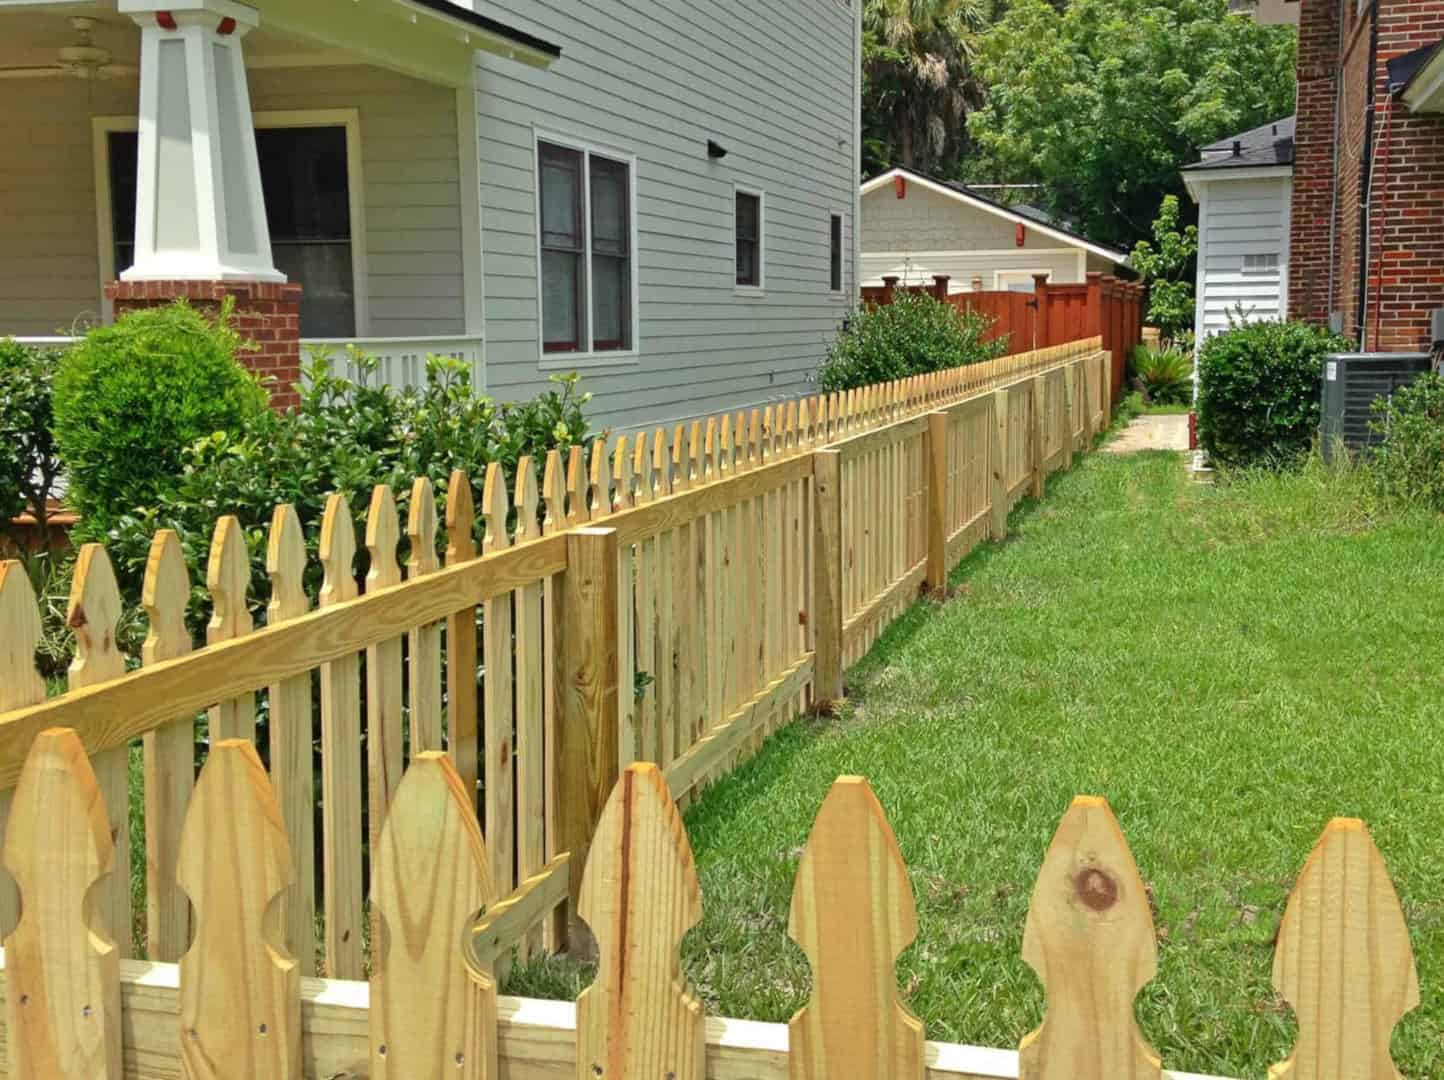 Mcminnville Fence Company 615 988 4455